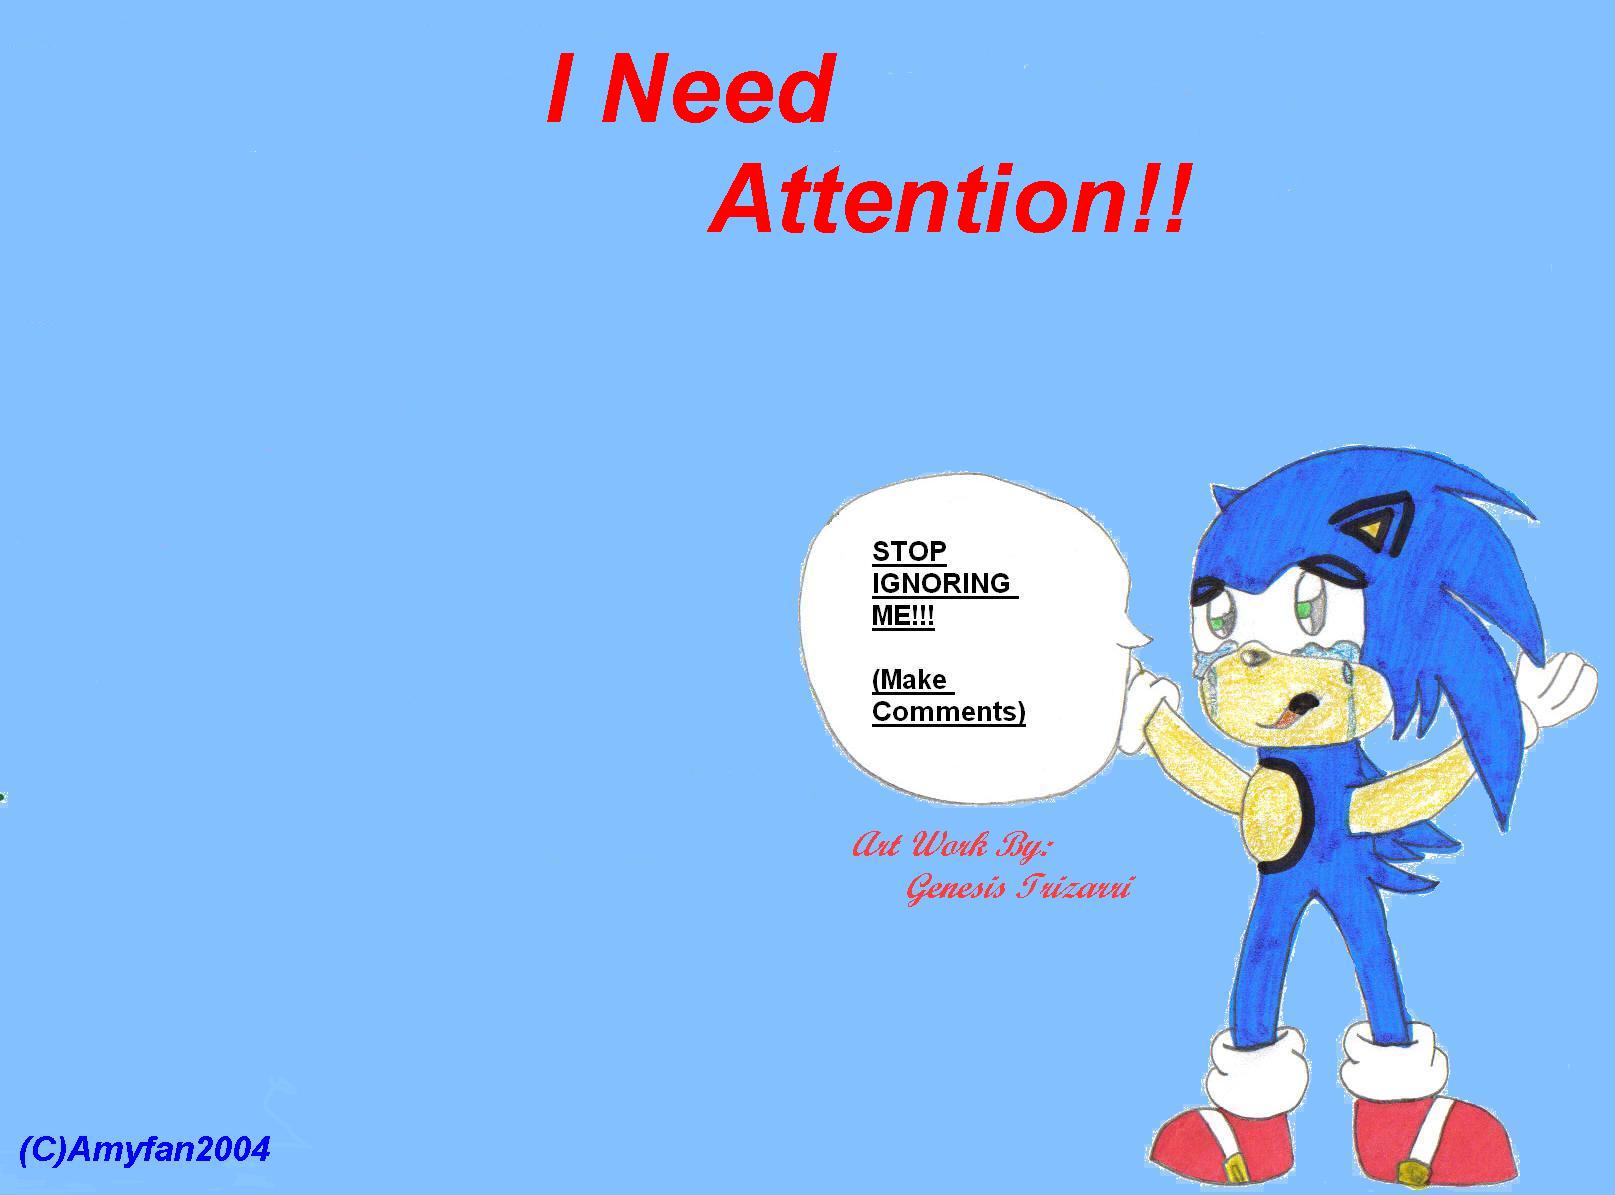 Chibi Sonic " I Need Attention!" by Amyfan2004